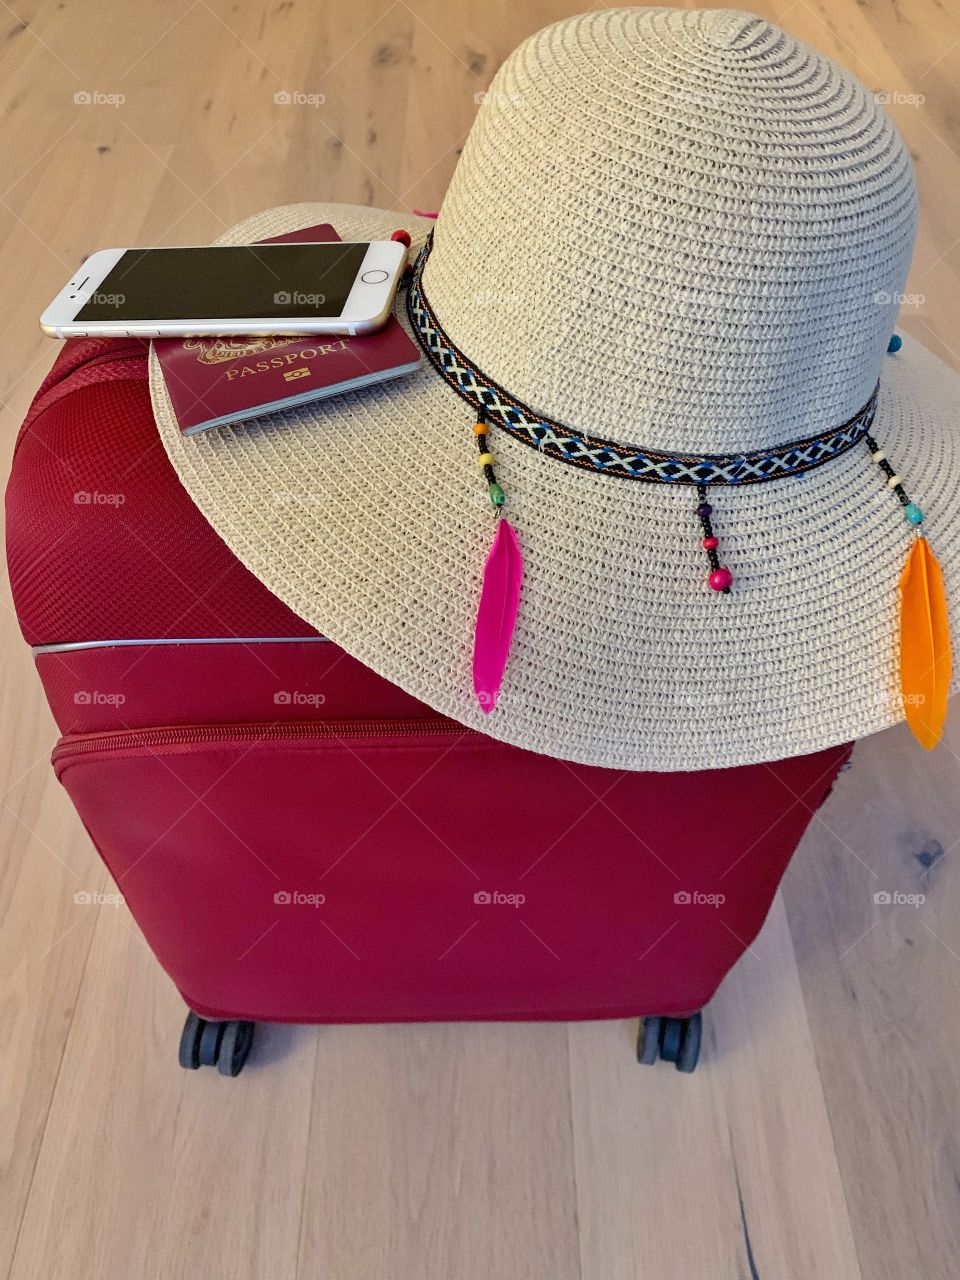 Suitcase with passport, phone and hat